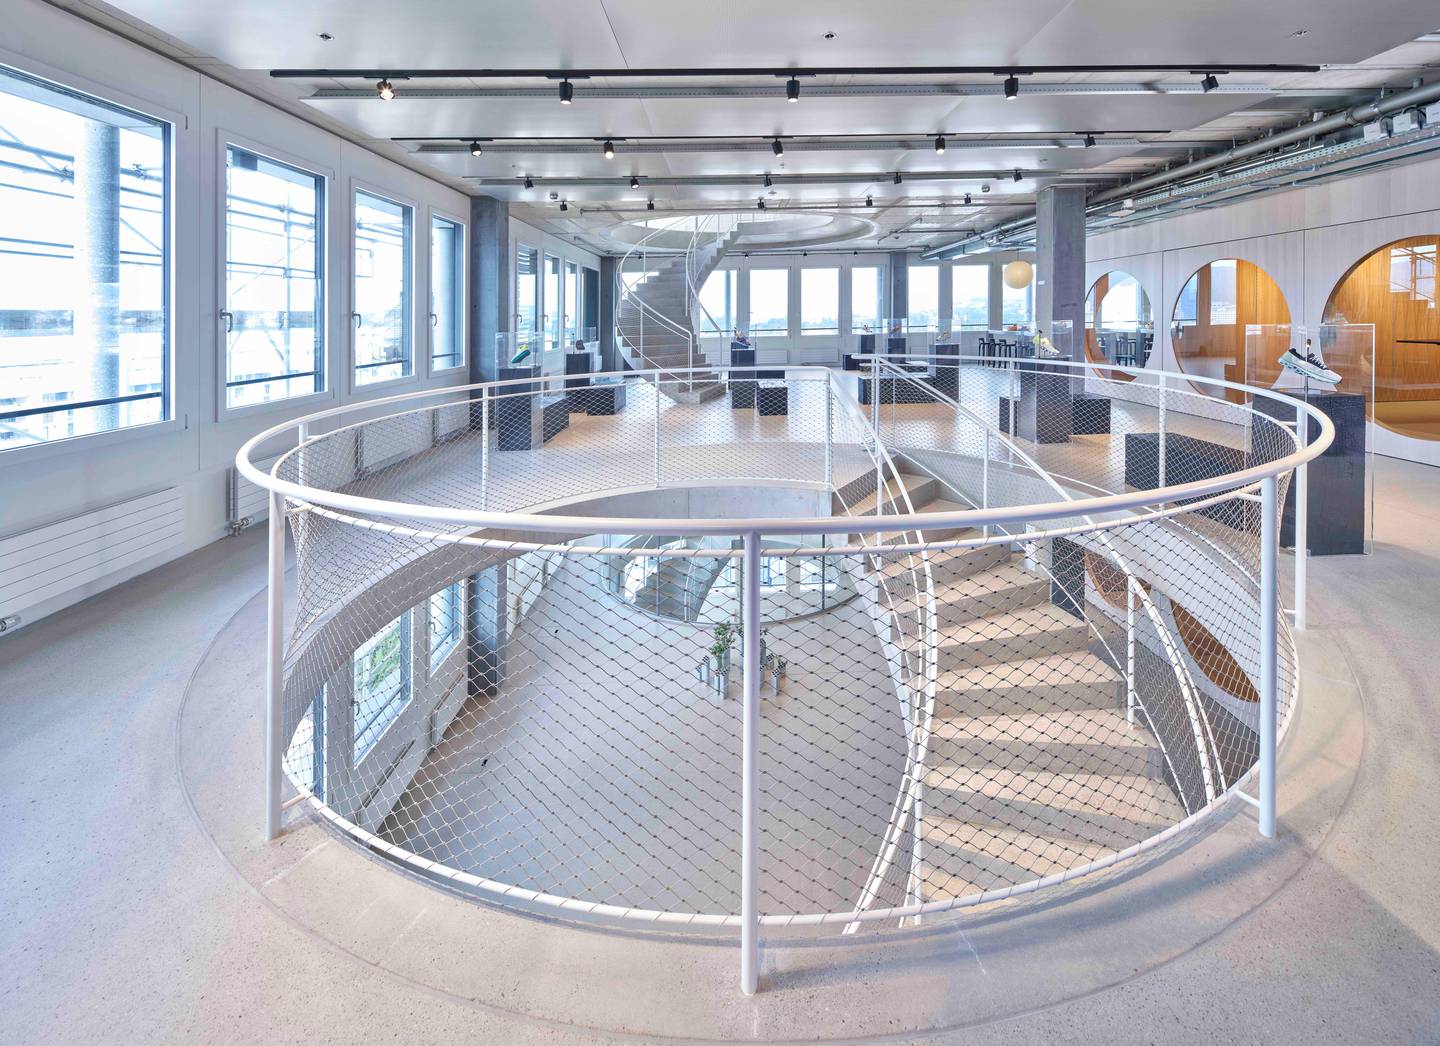 On, the running shoe brand based in Zurich, Switzerland, opened its new 17-floor office space this year outfitted with a central stairway dubbed "The Trail."